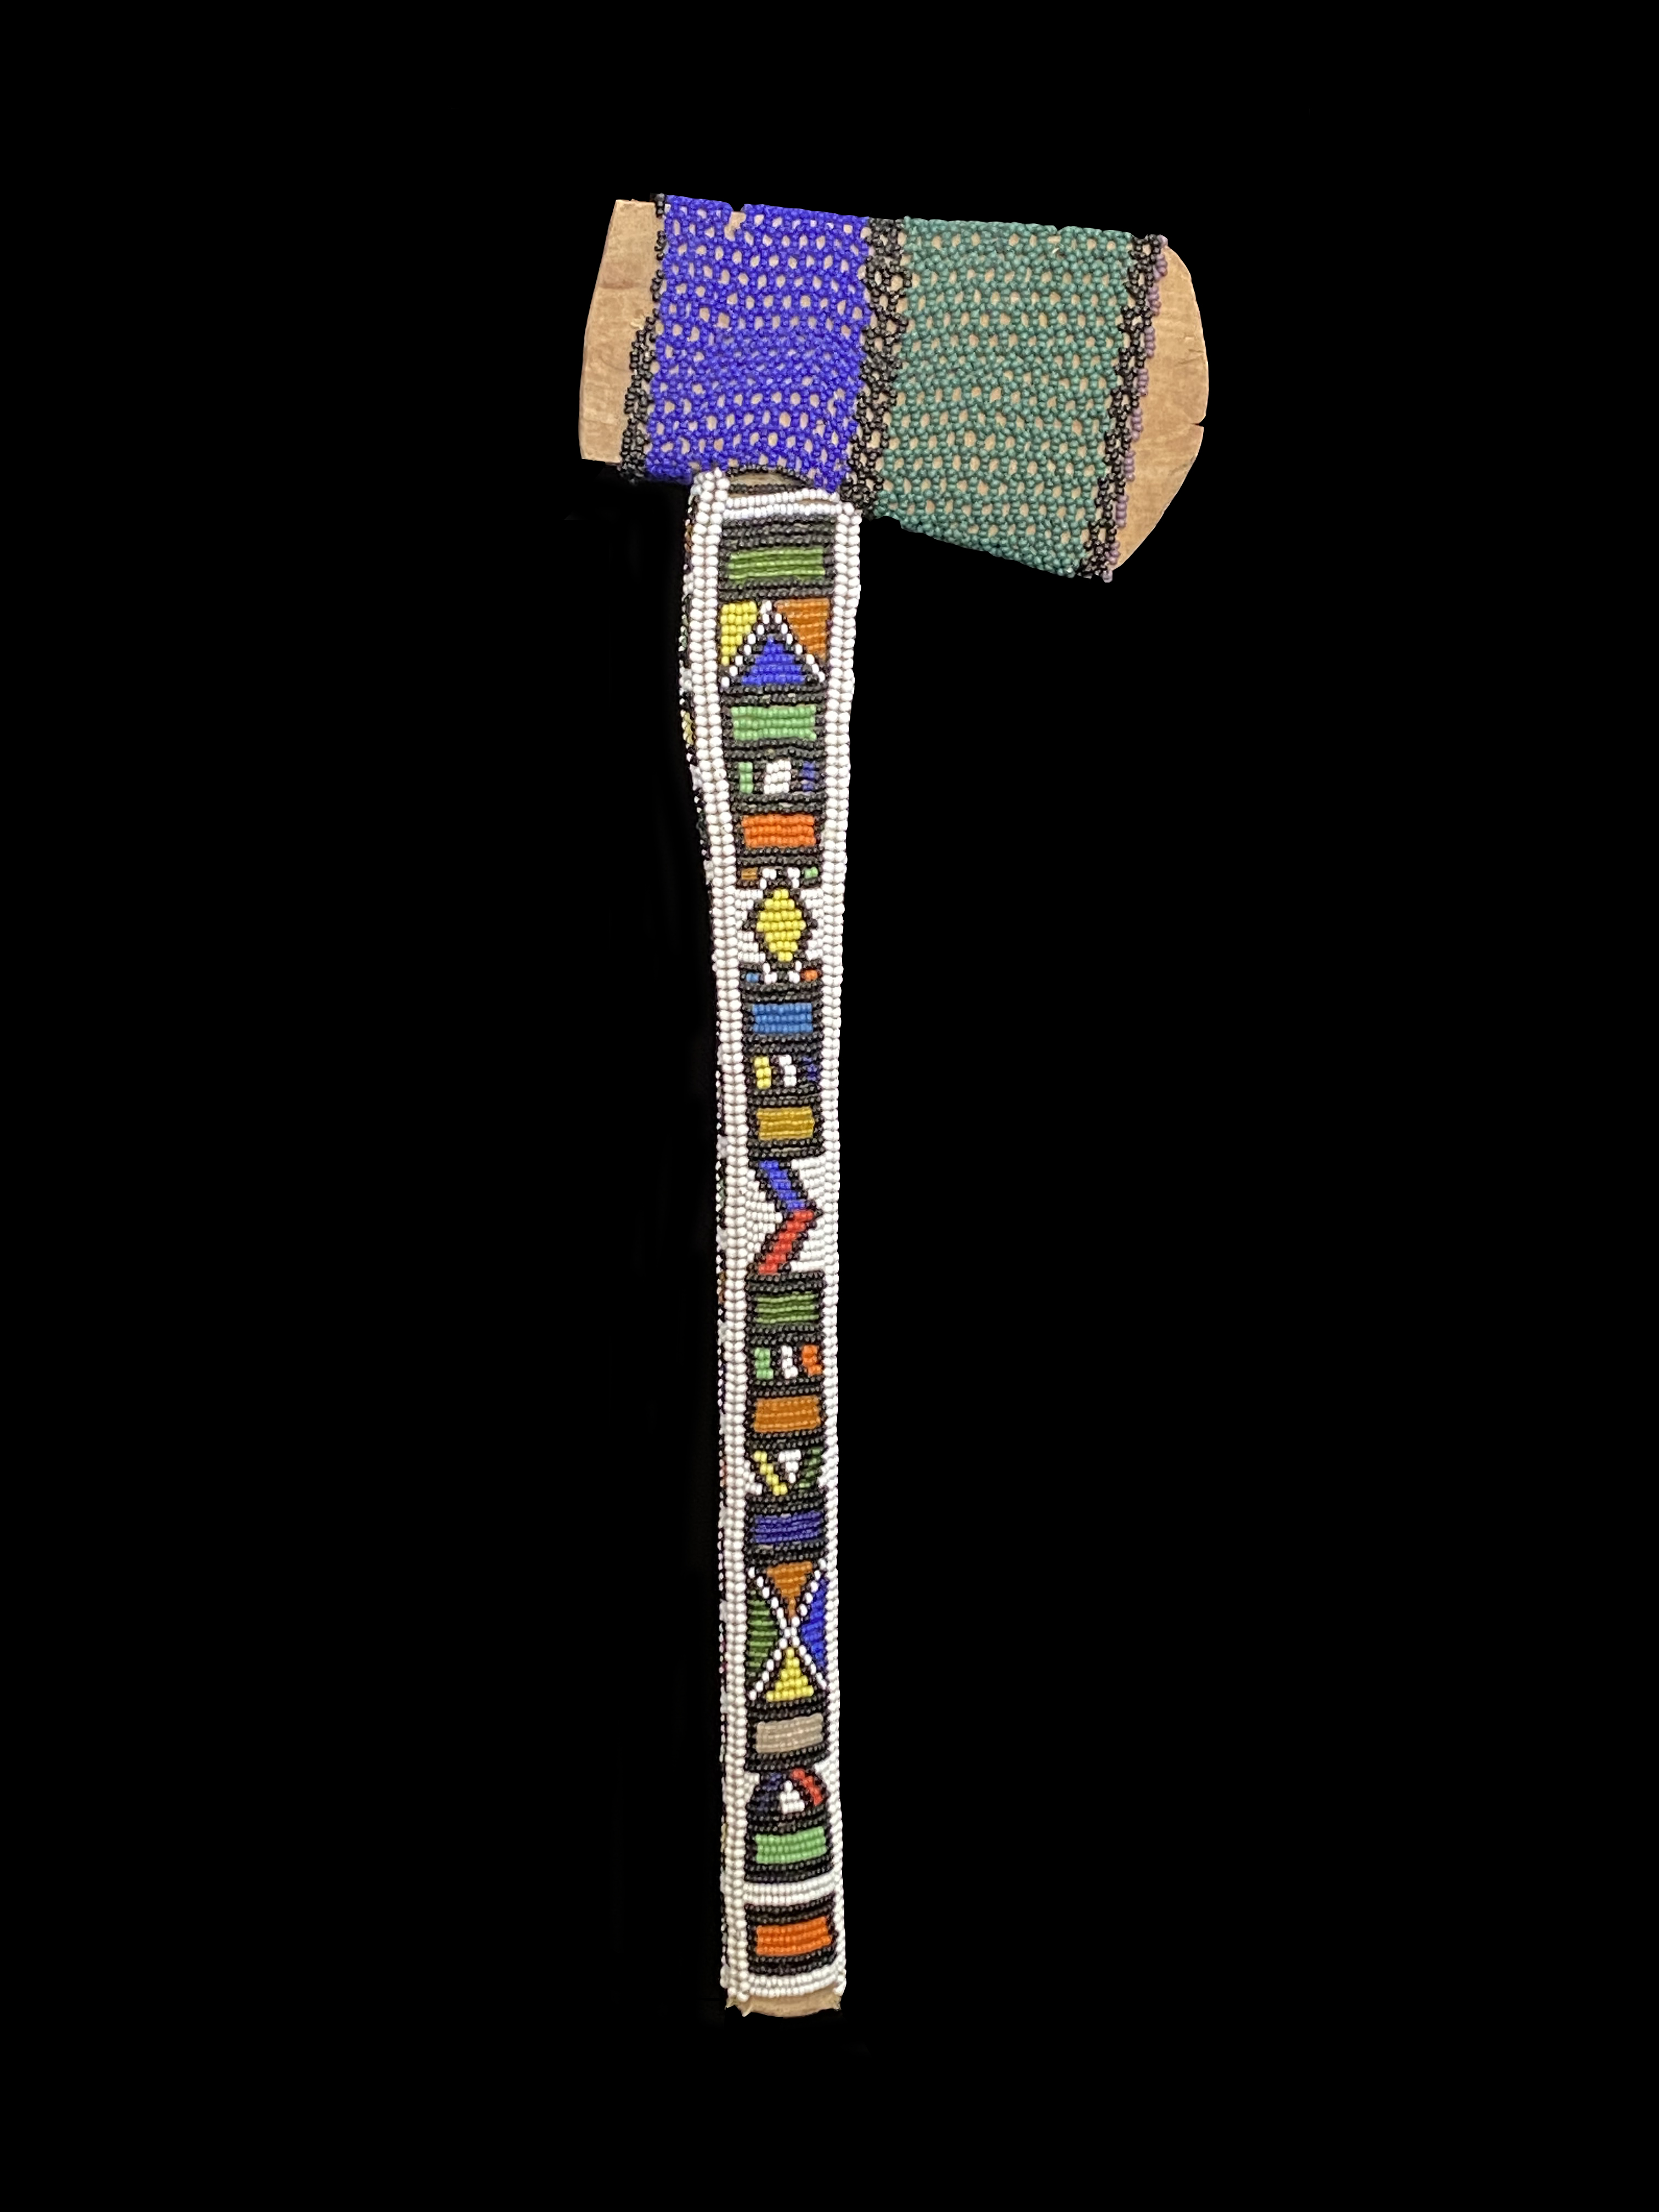 Beaded Dance Mace in the shape of an Ax - Ndebele People, South Africa